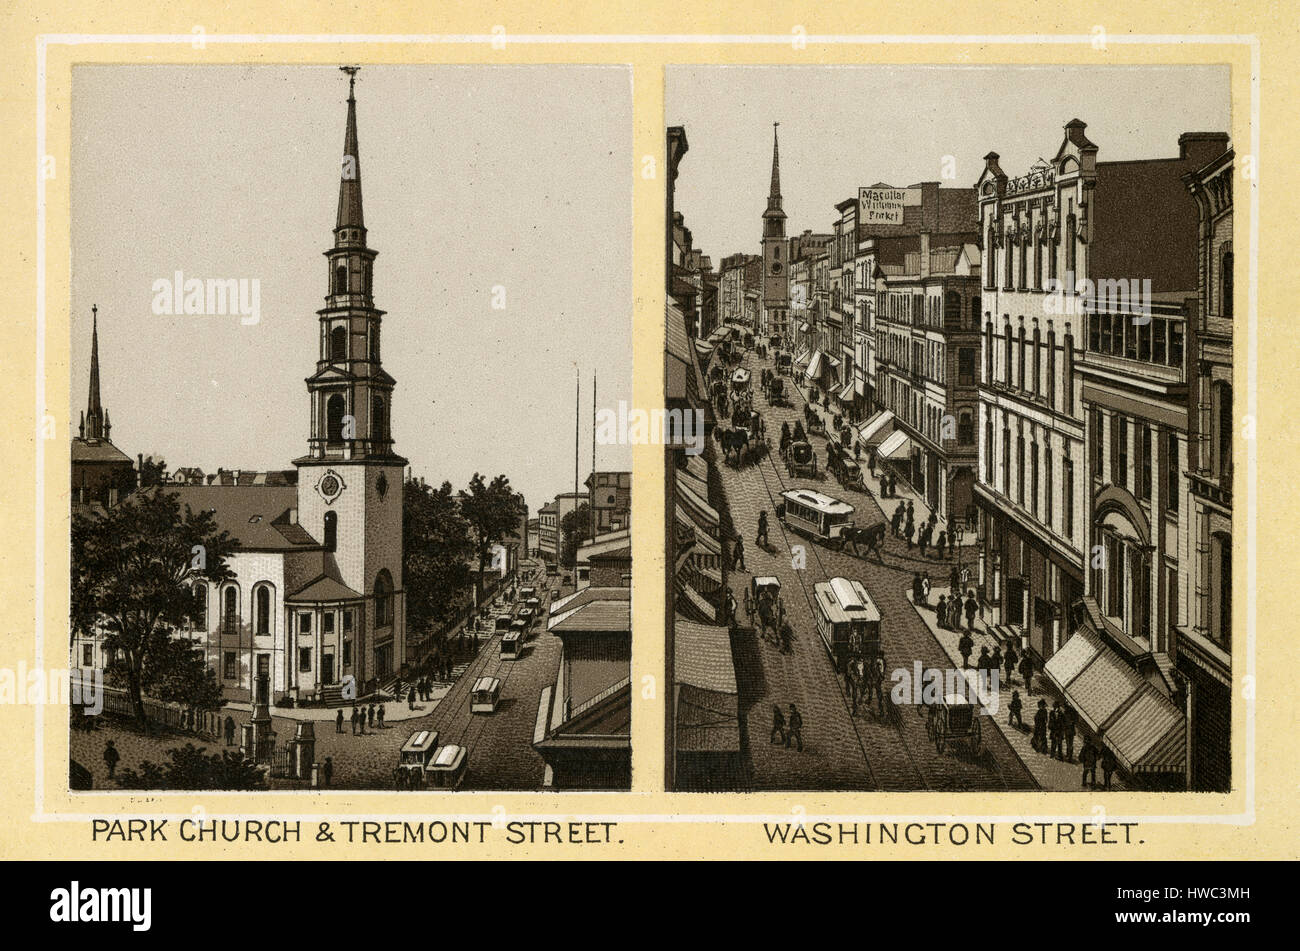 Antique 1883 monochromatic print from a souvenir album, showing the Park Church & Tremont Street and Washington Street in Boston, Massachusetts. Printed with the Glaser/Frey lithographic process, a multi-stone lithographic process developed in Germany. Stock Photo